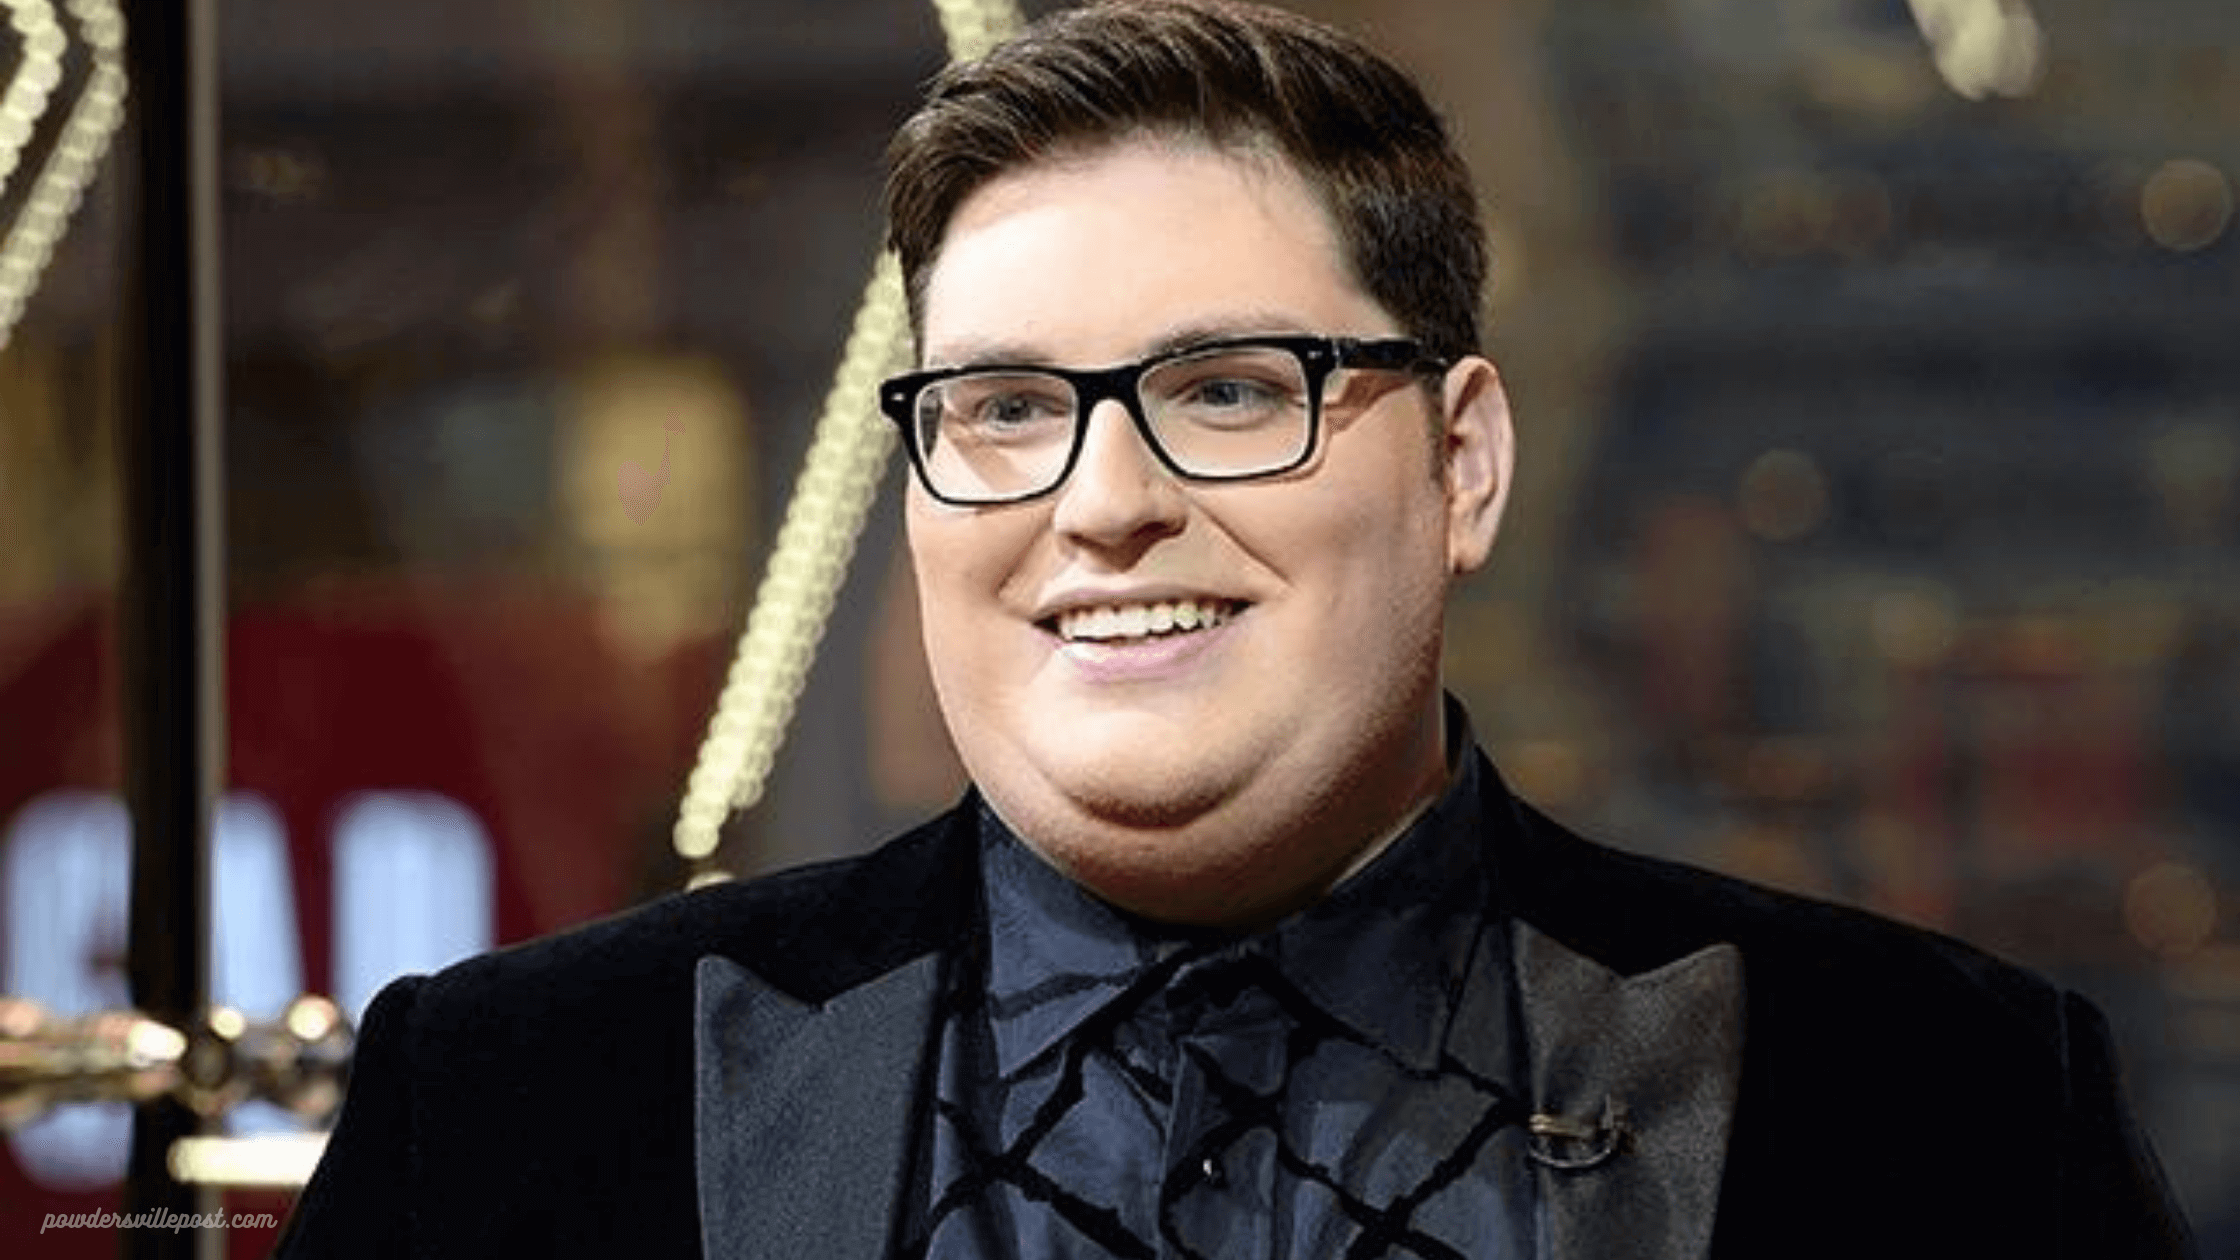 Is Jordan Smith Married? Check Jordan Smith's Age, Height, Wife, Kids, Net Worth, Bio, And More